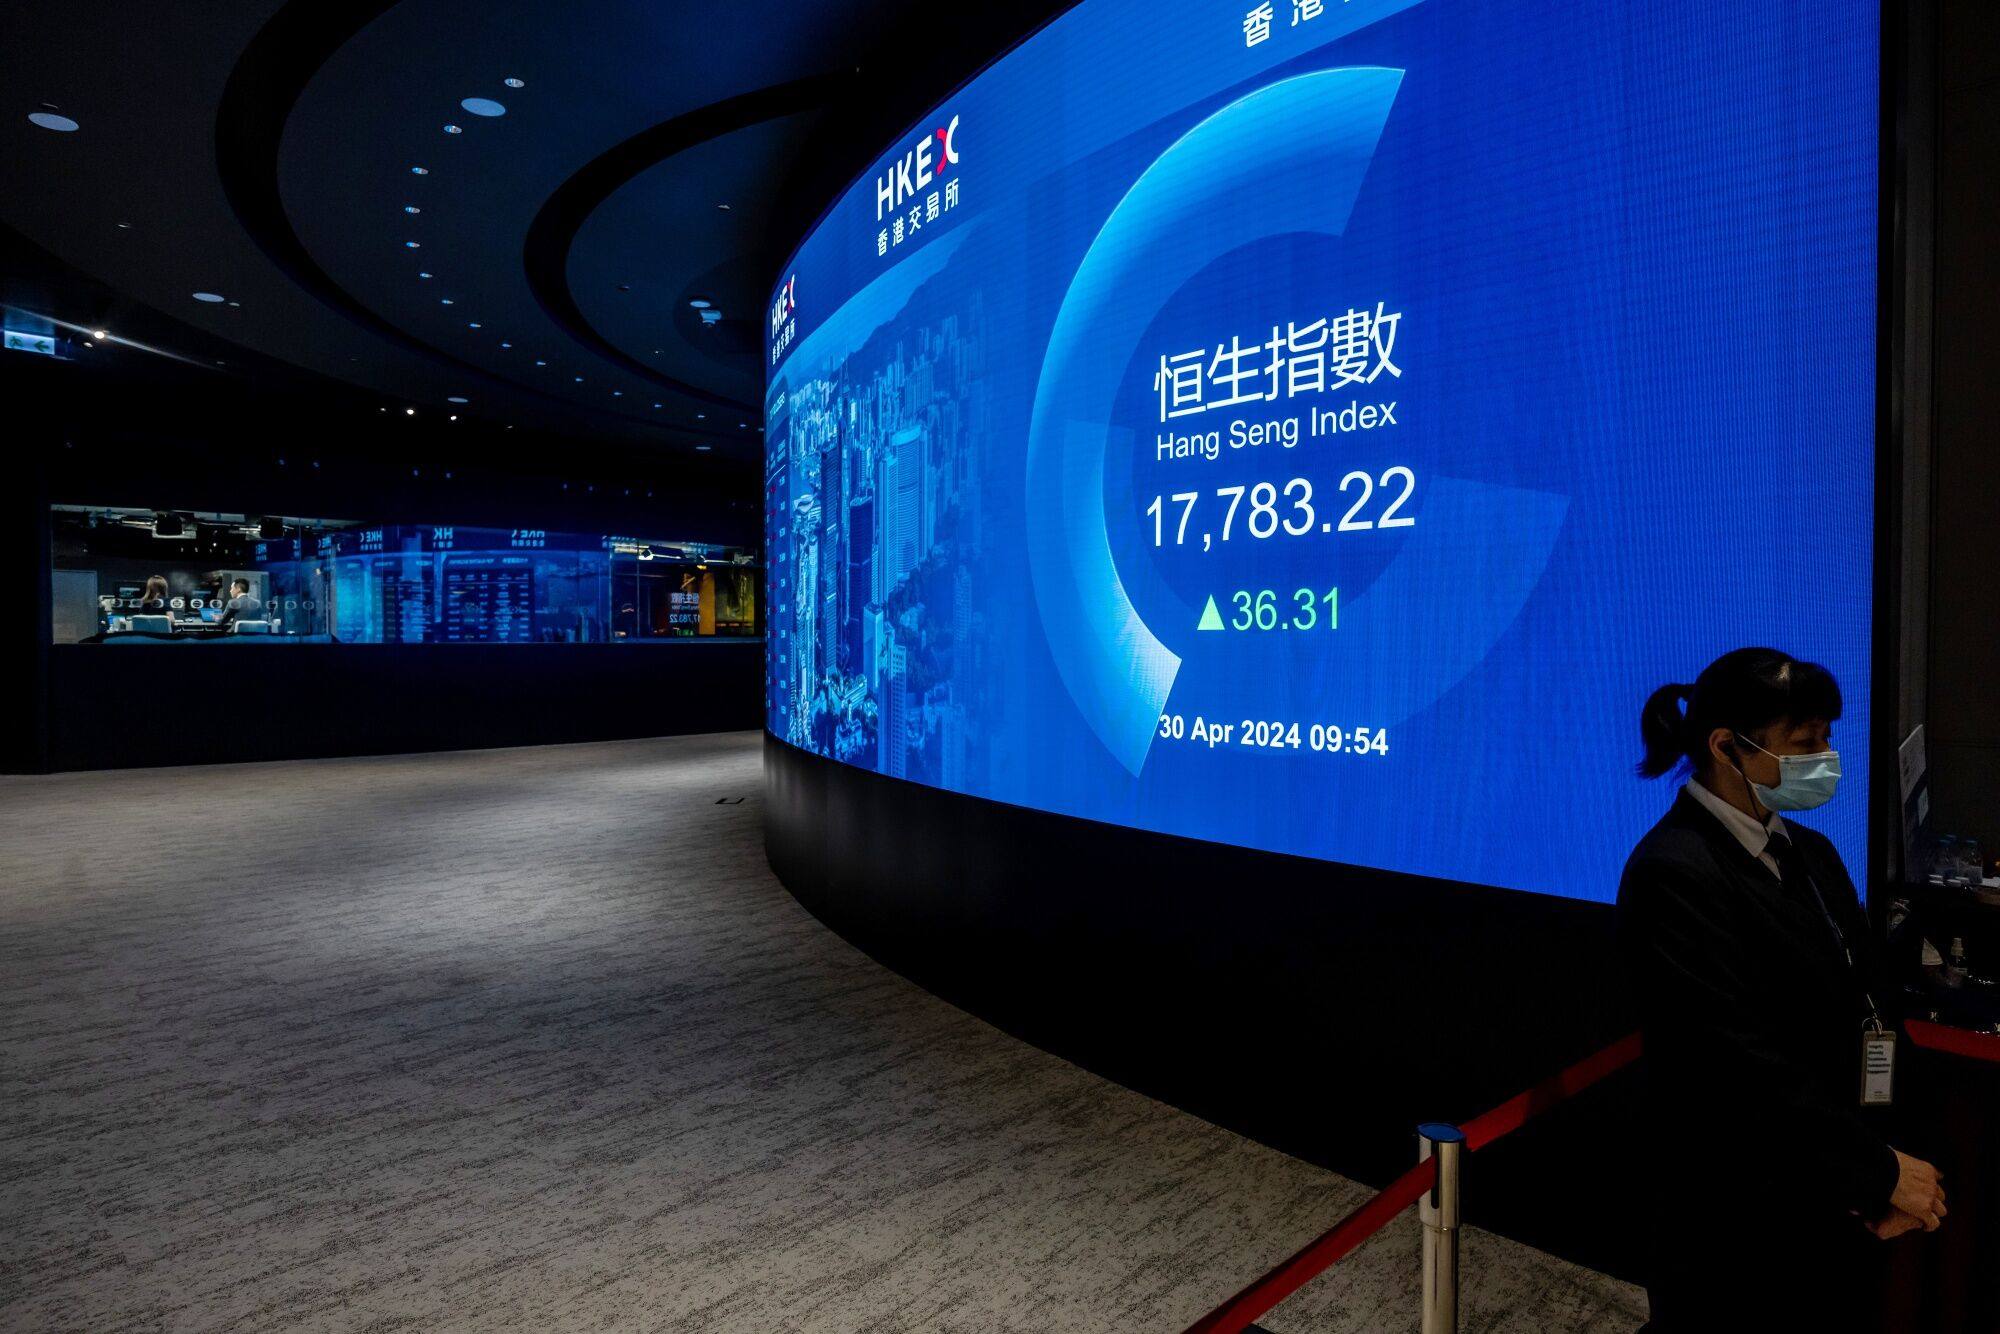 The figures for the Hang Seng Index are seen on a screen at the Hong Kong Stock Exchange on April 30. Photo: Bloomberg